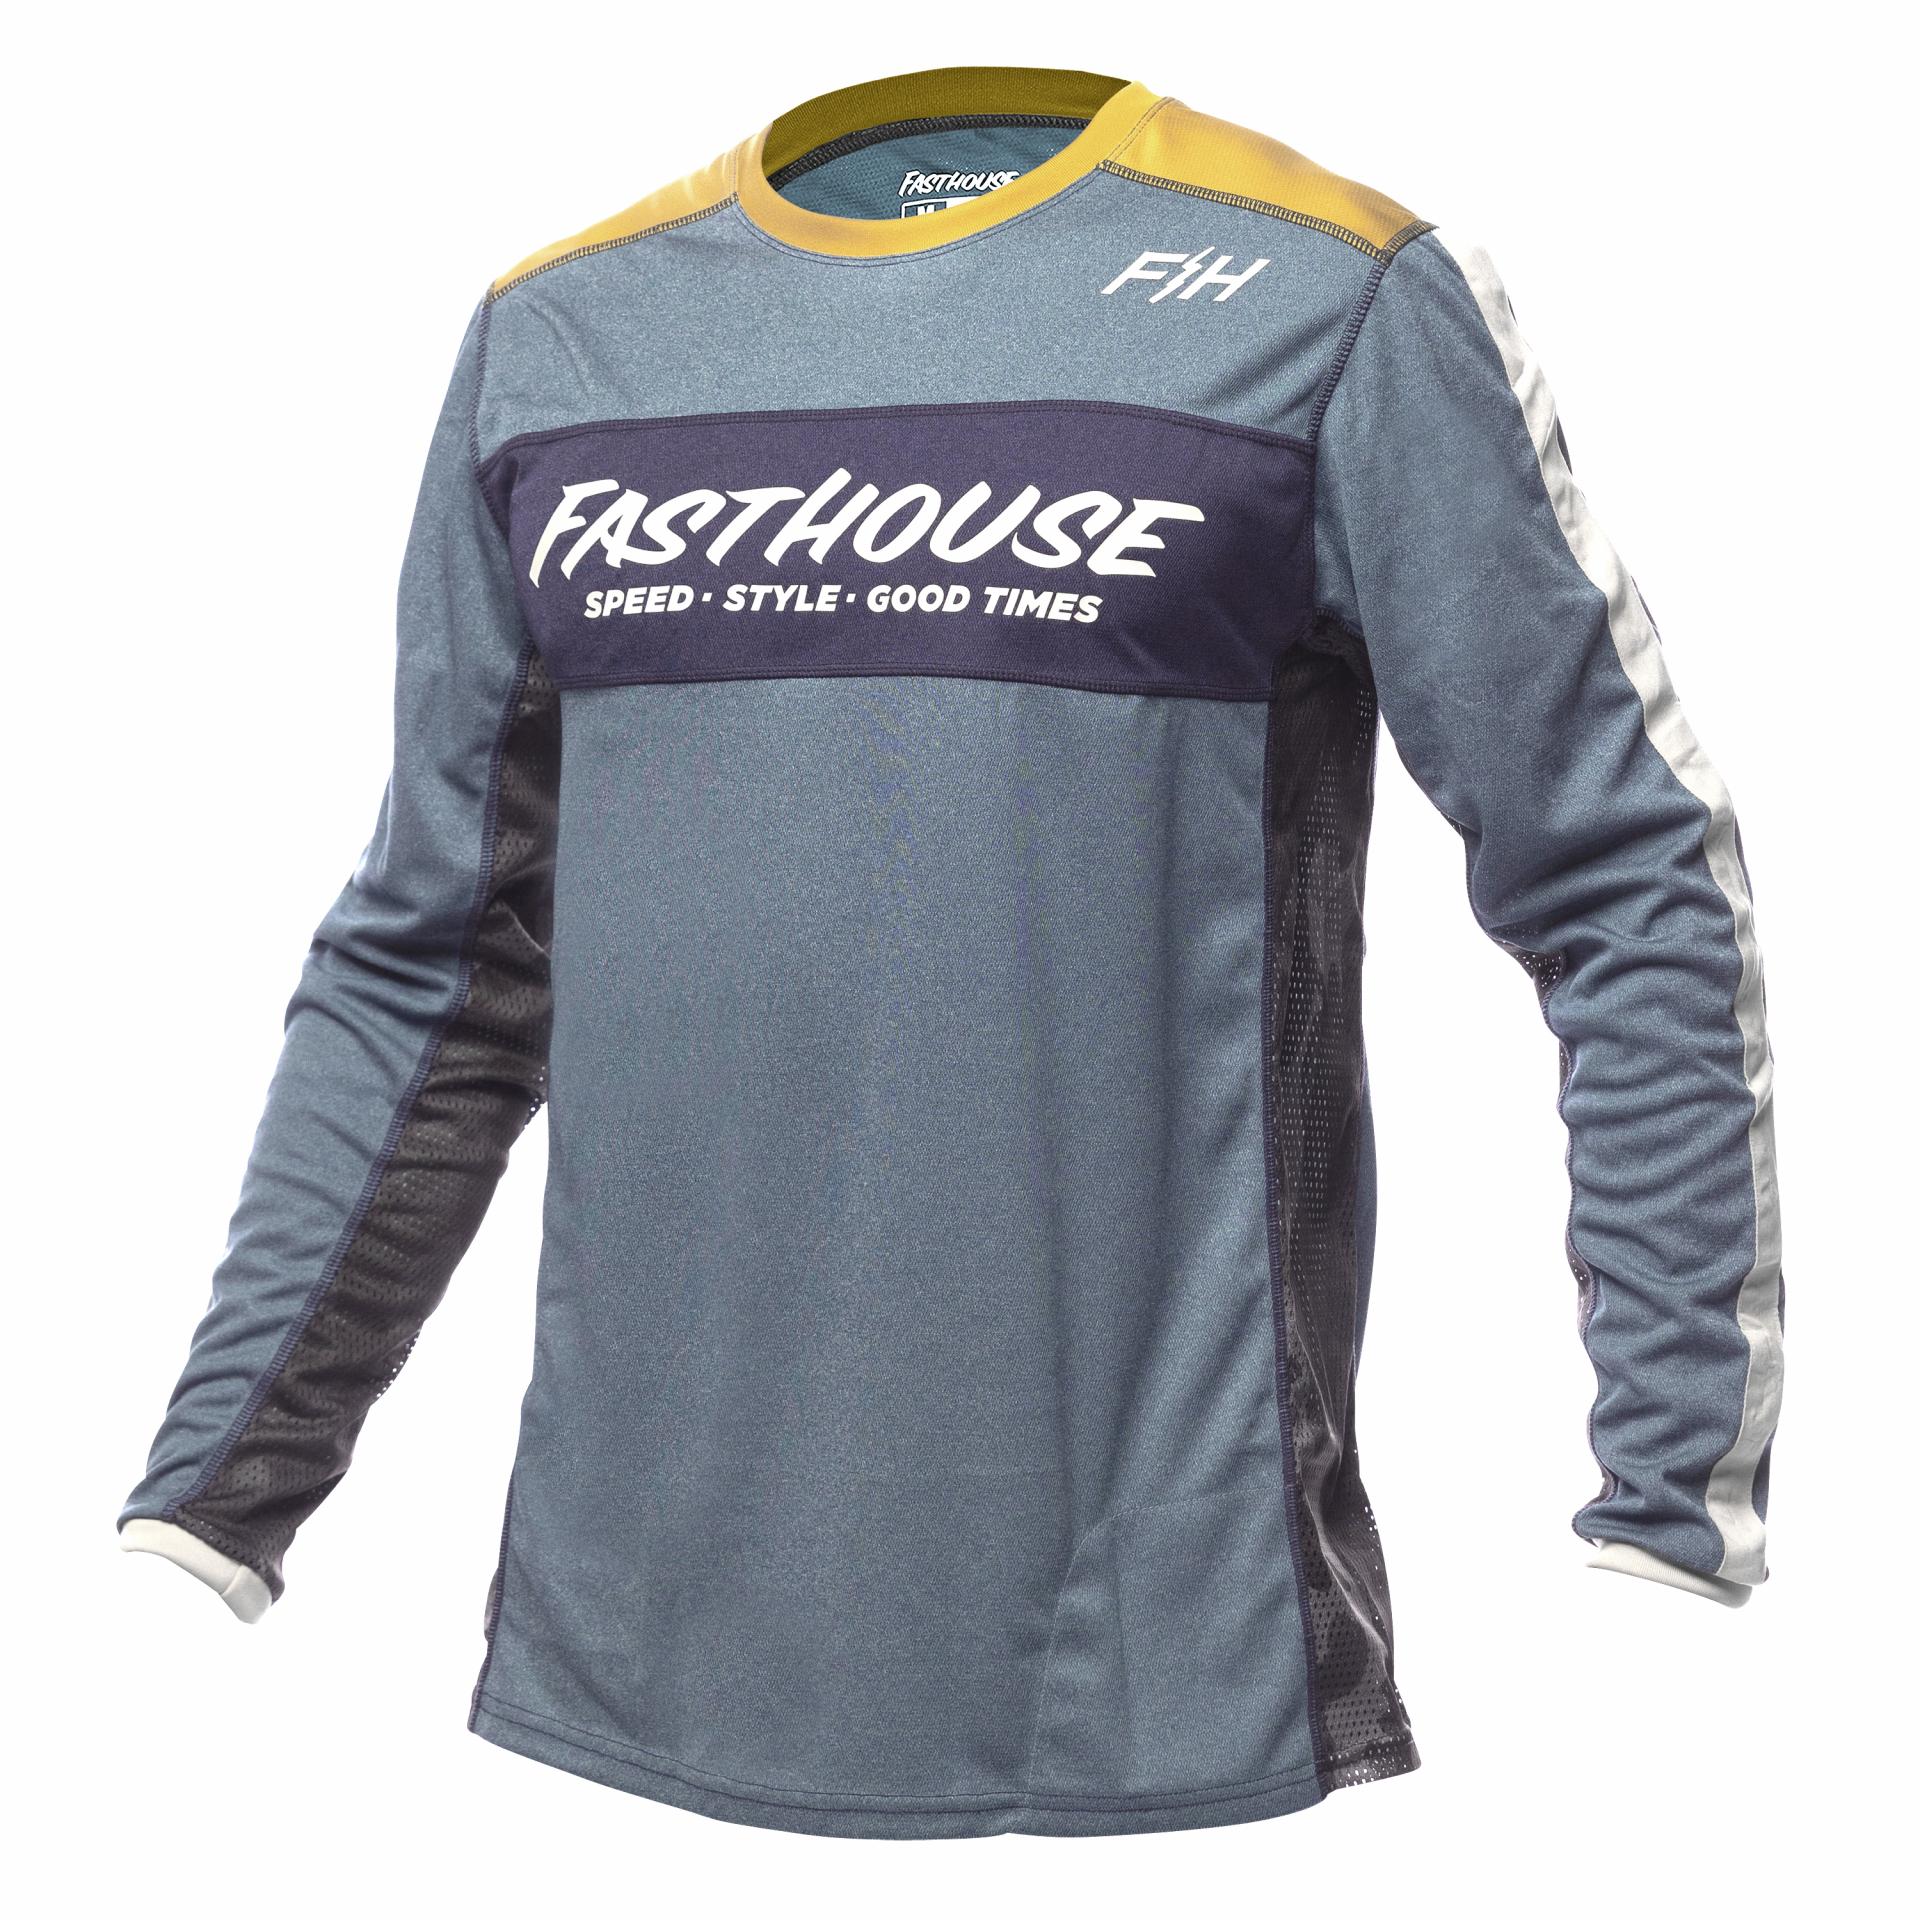 FASTHOUSE Unisex Kids Carbon Jersey 